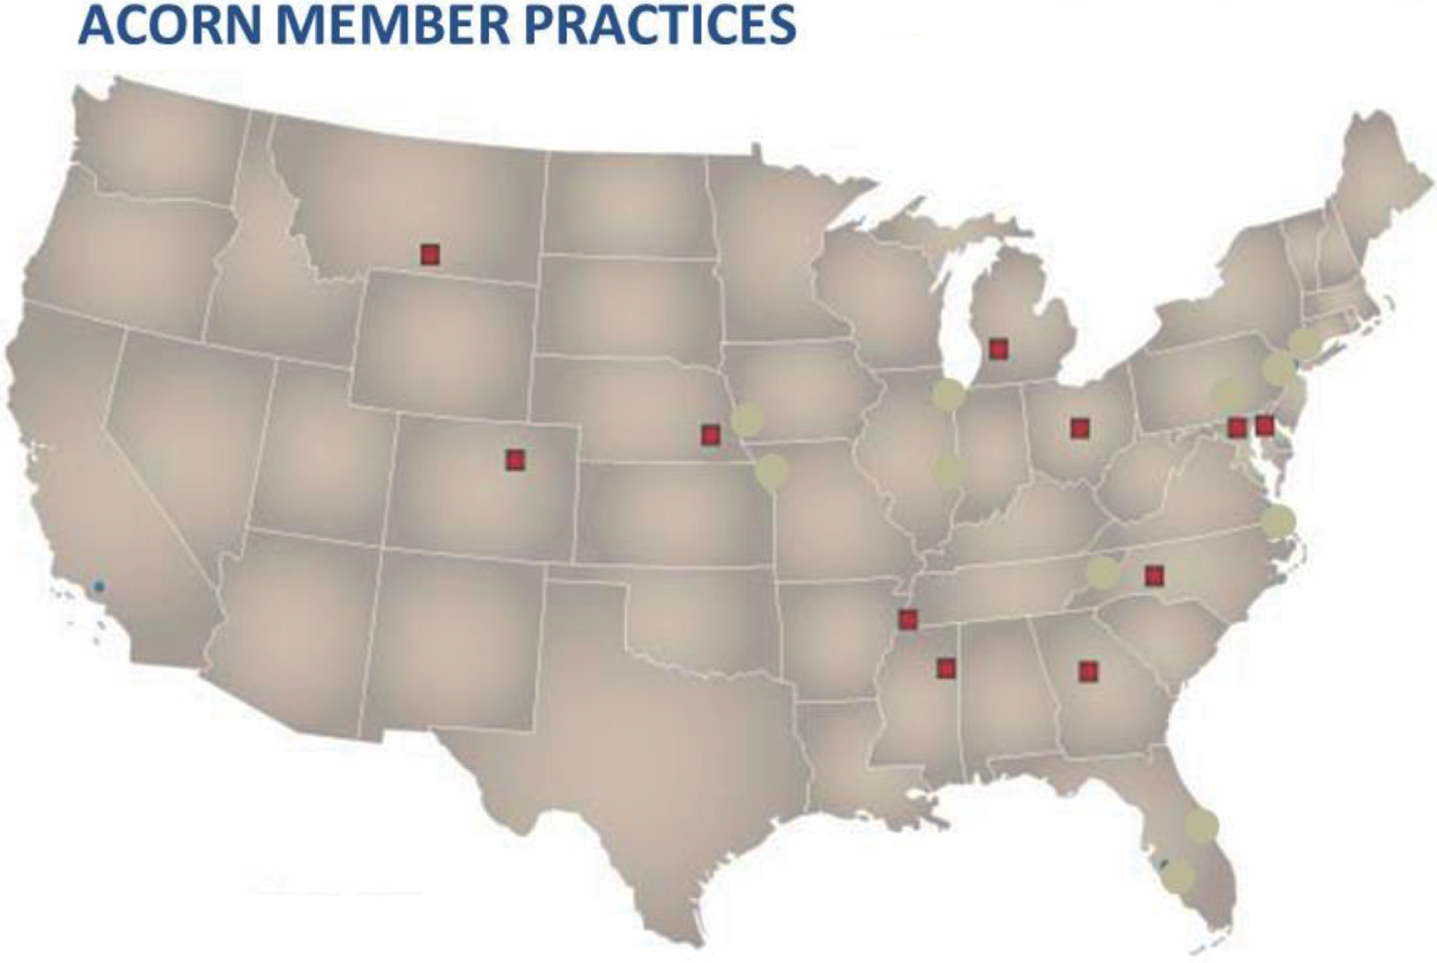 Geographic locations of practices encompassing the ACORN network that contributed to this study.